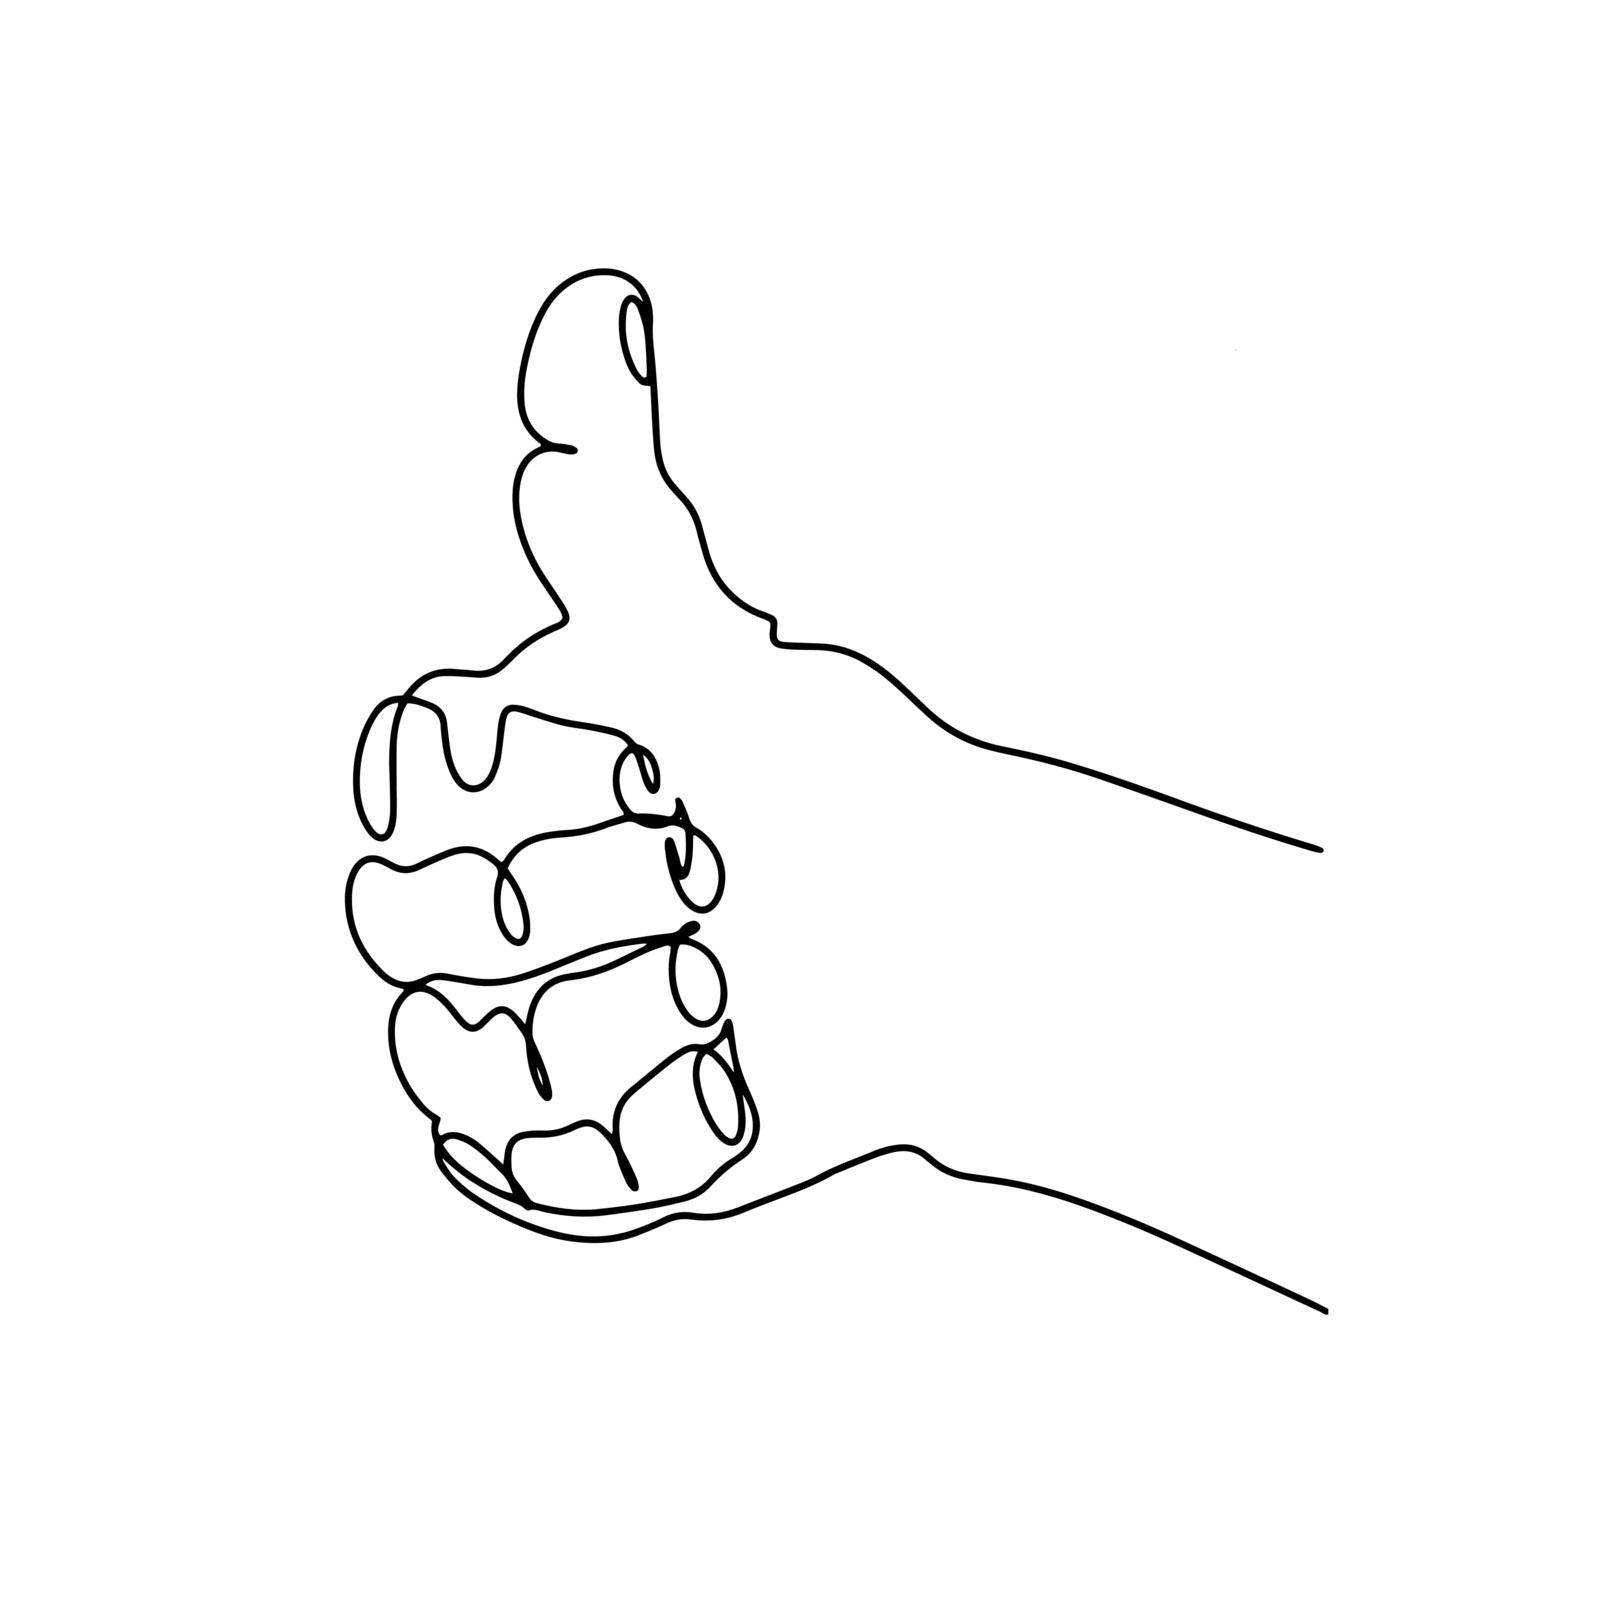 Hand fist with raised thumb up line art illustration vector. Symbol approval and consent. Class sign one line